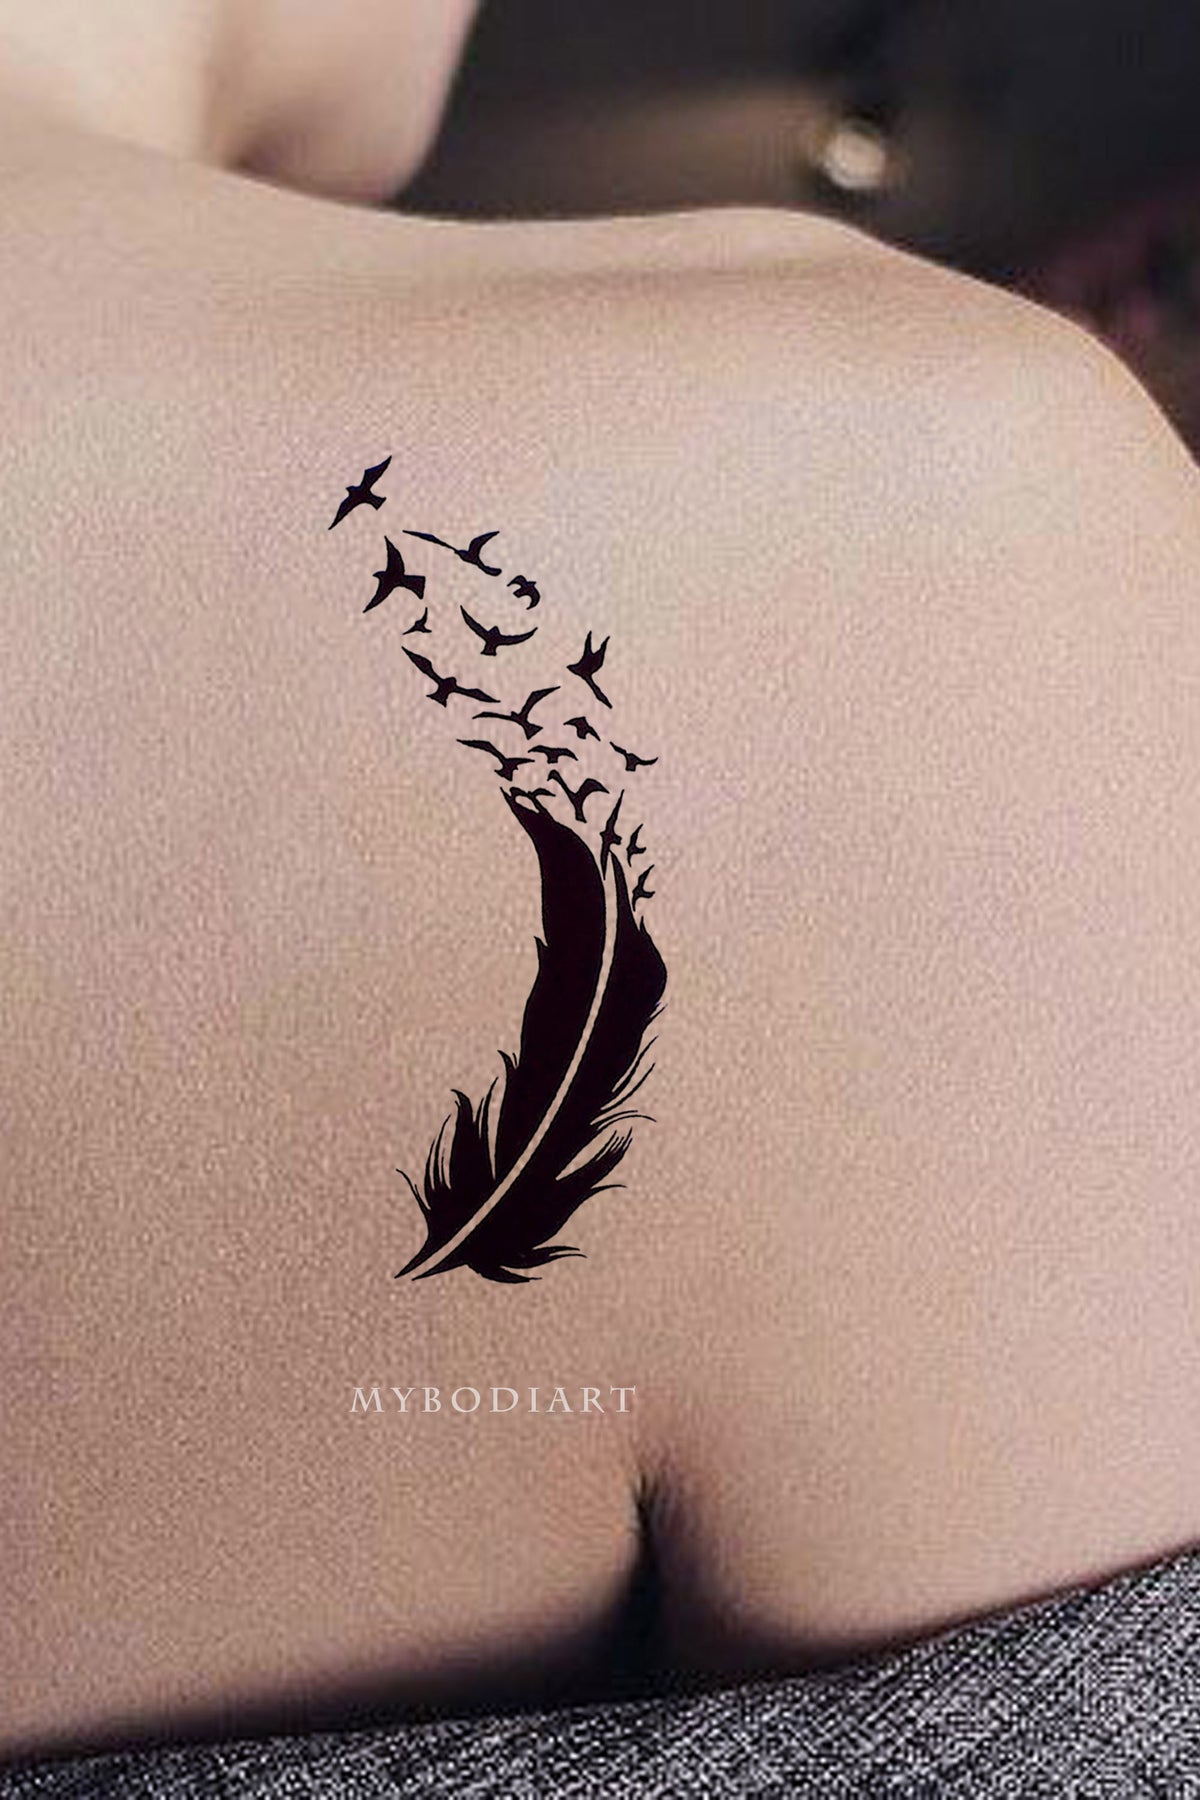 15+ Cardinal Tattoo Designs to Symbolize Love and Hope